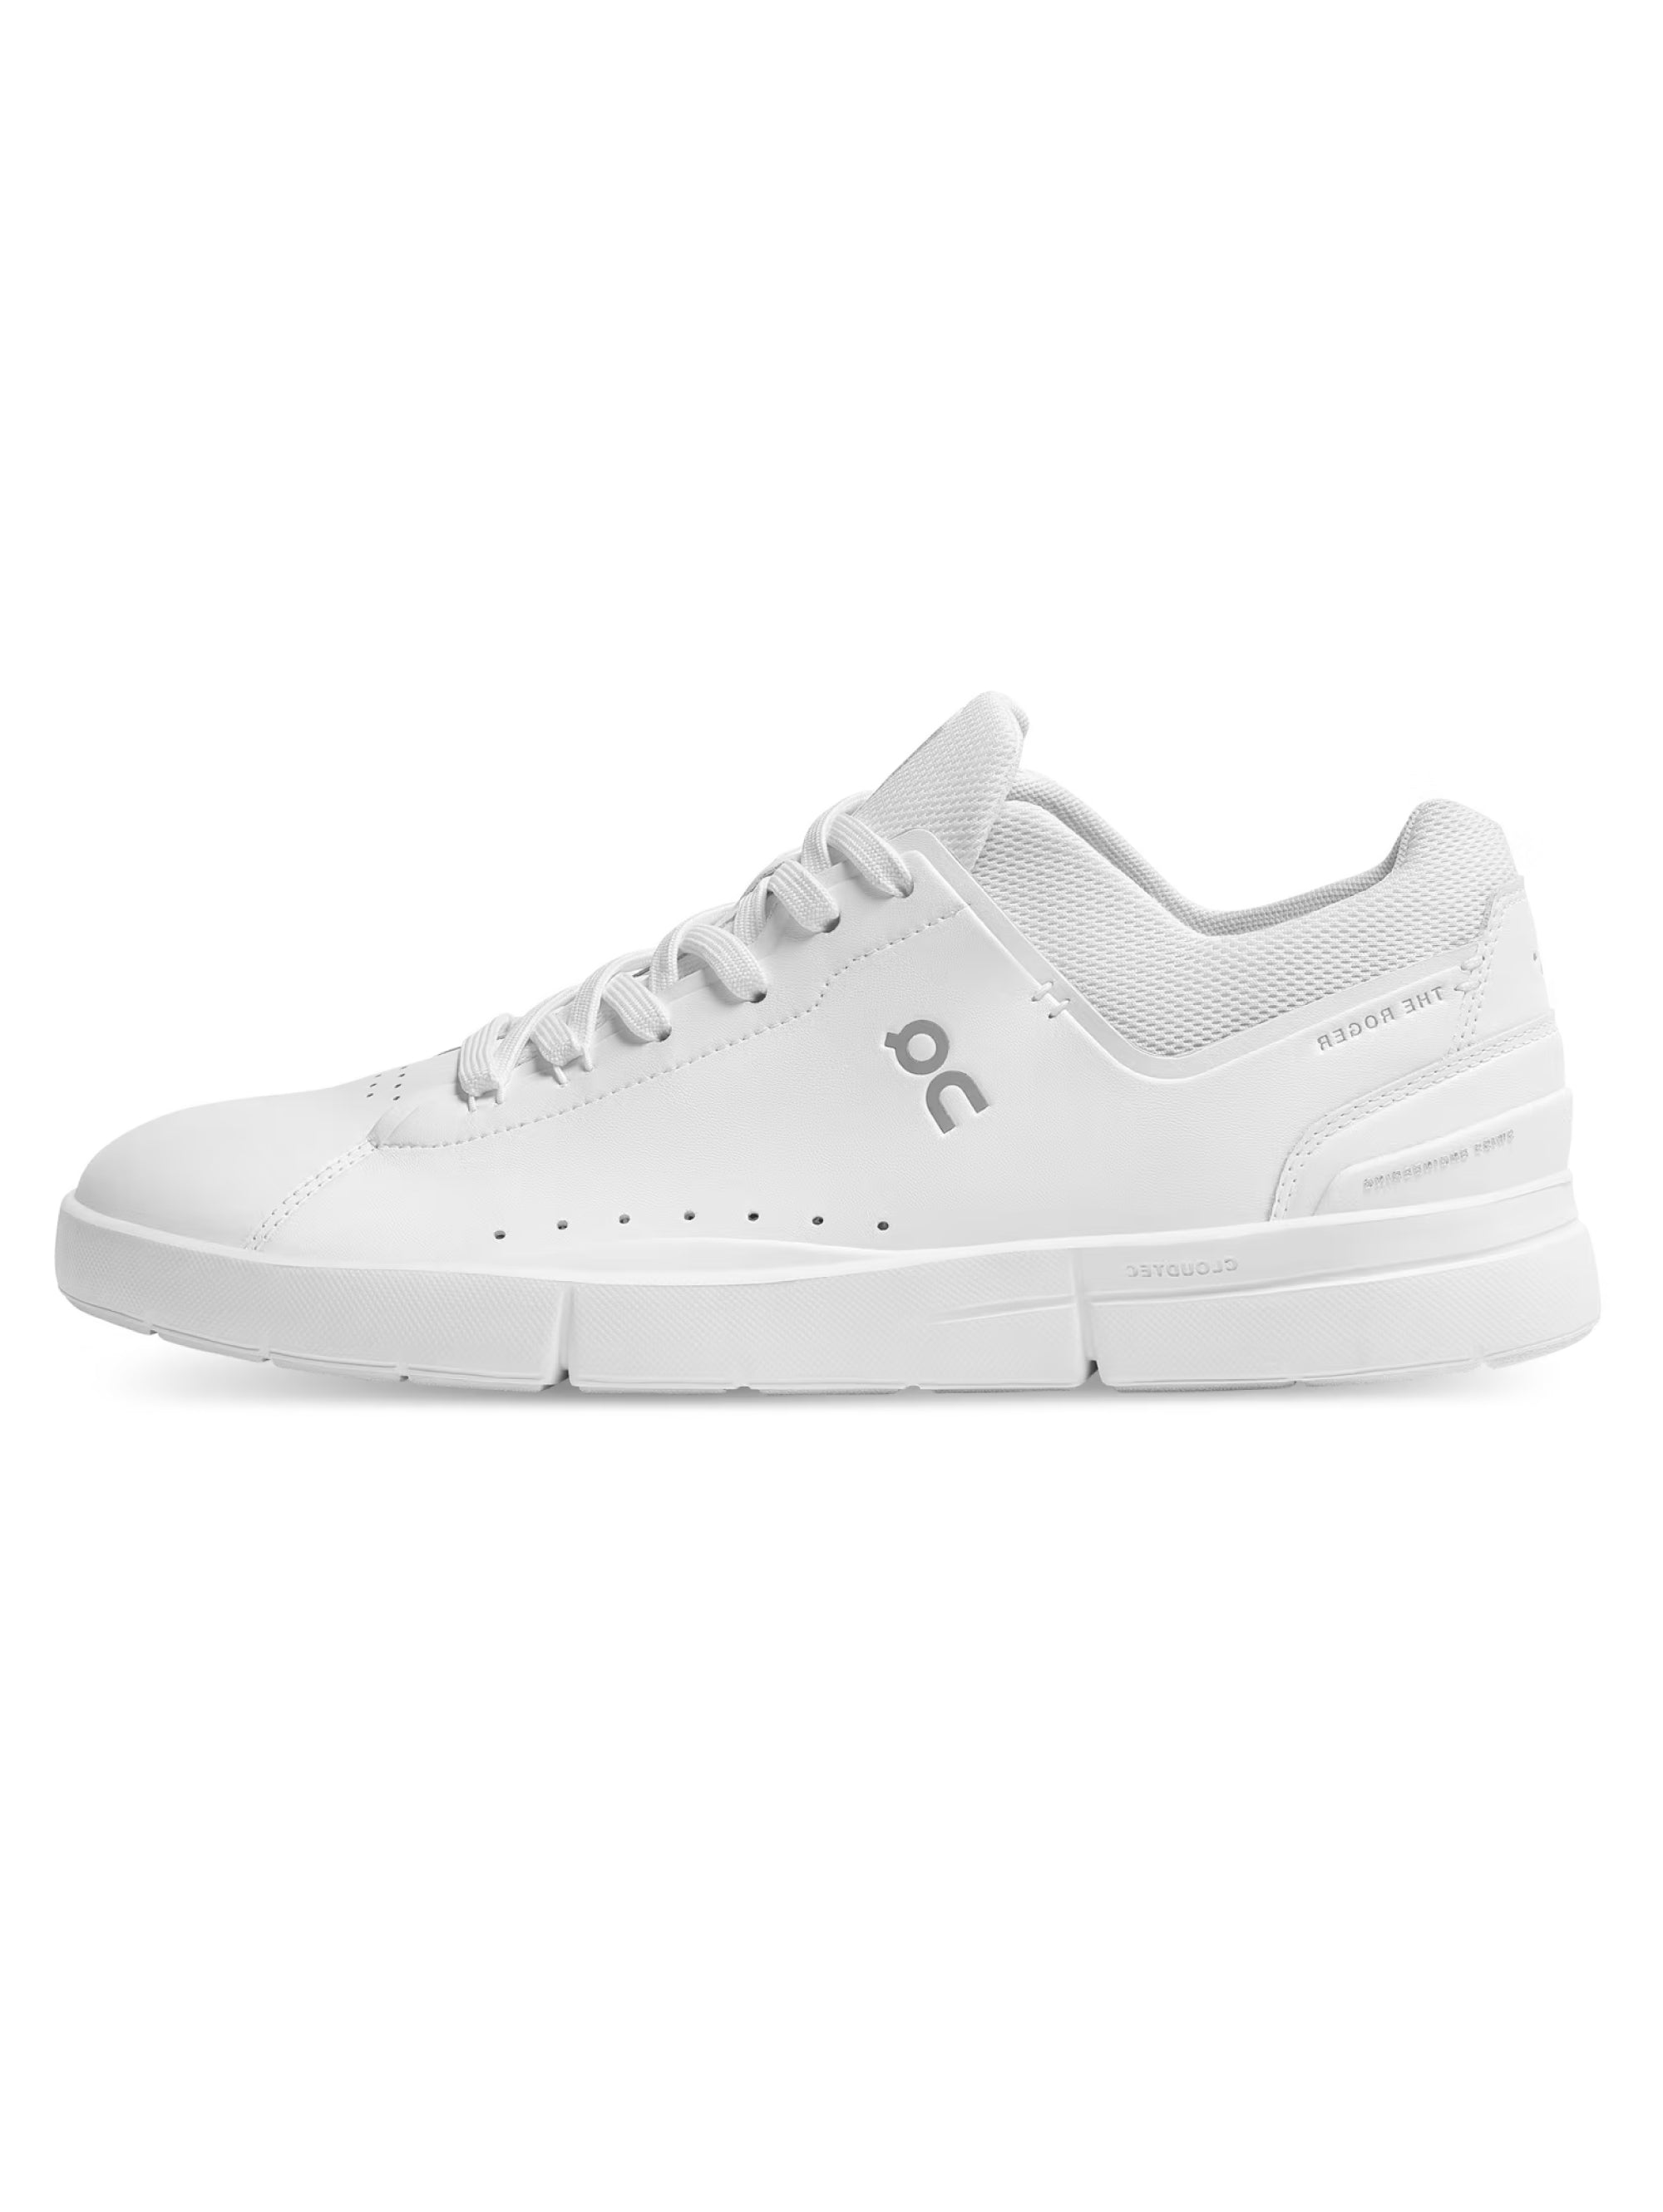 ON RUNNING-Sneakers The Rogers Advantage in Pelle Vegana Bianco-TRYME Shop